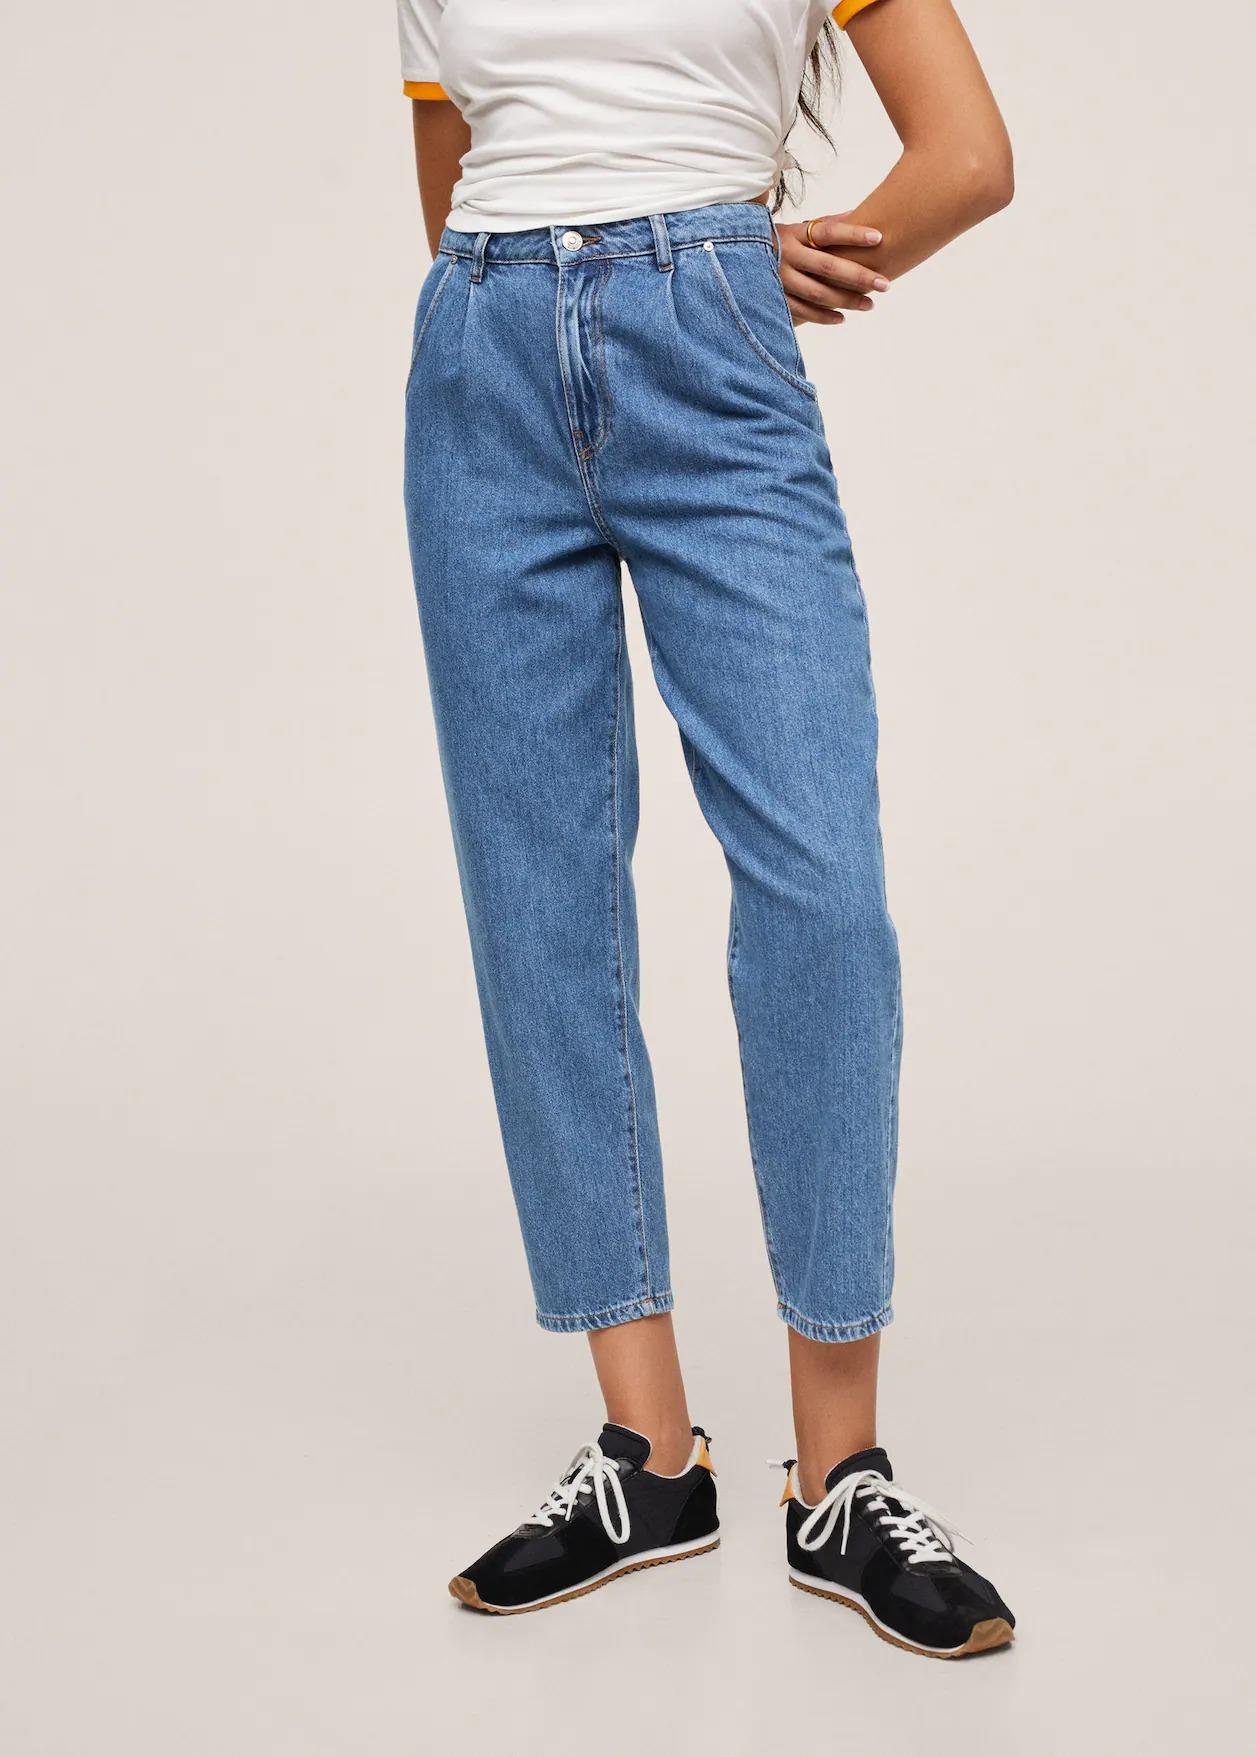 Mango outlet rebajas, jeans slouchy